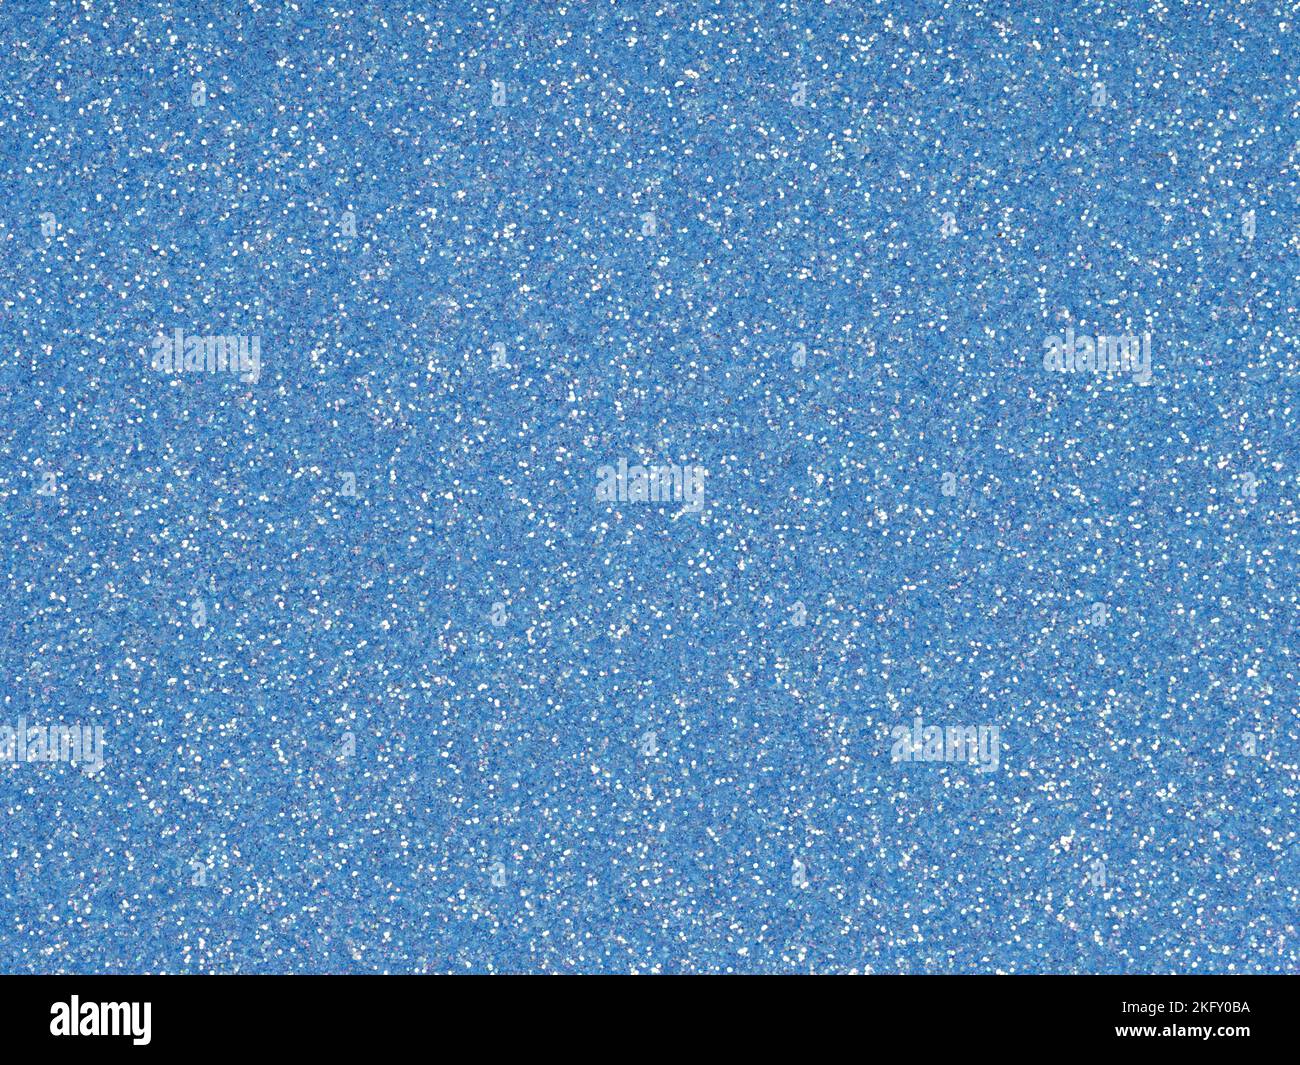 40,569 Navy Glitter Background Images, Stock Photos, 3D objects, & Vectors